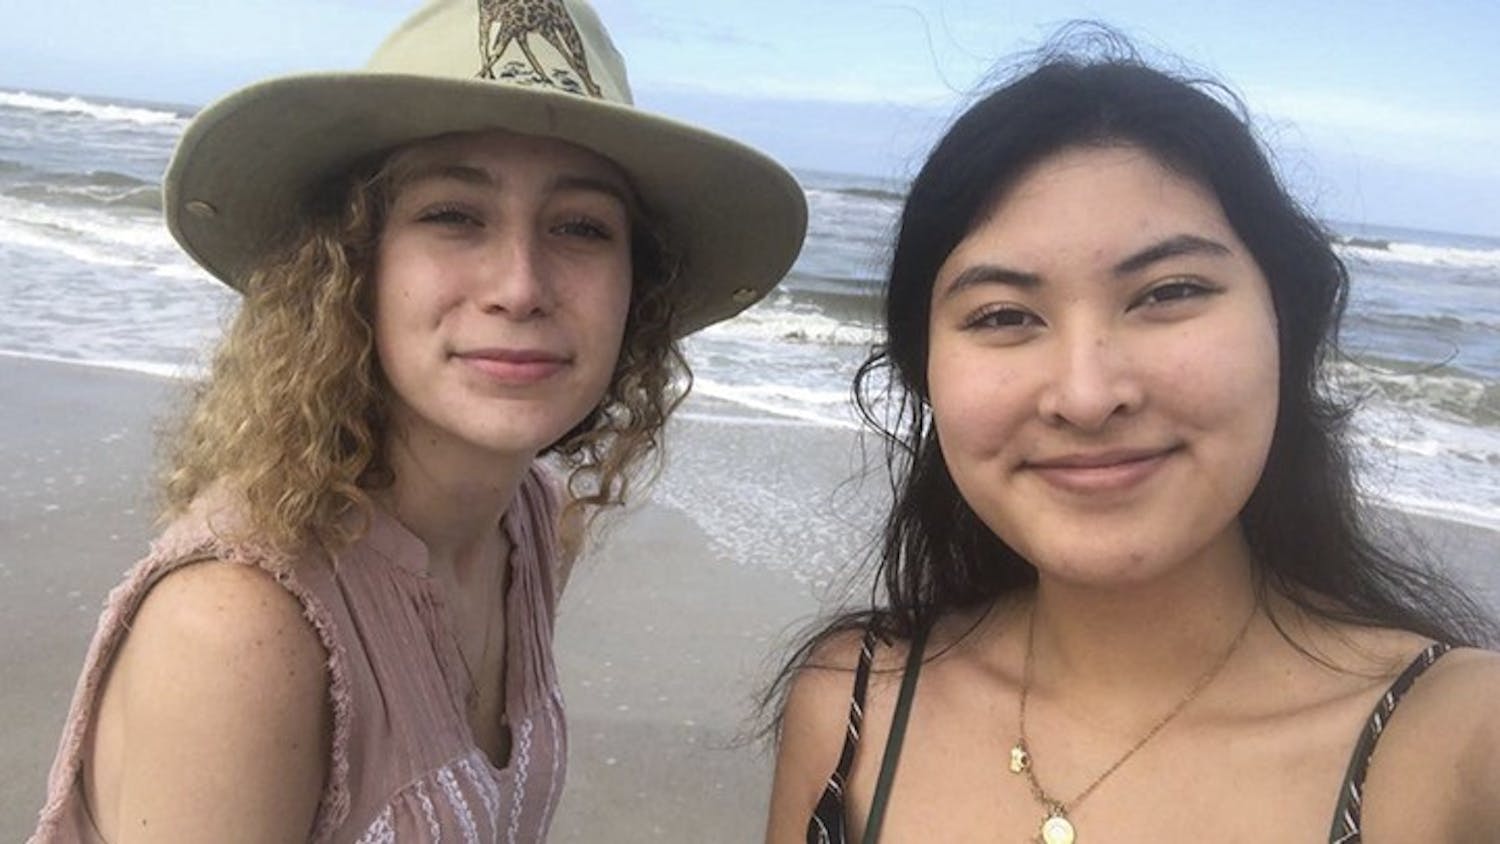 Editor-in-chief Erin Slowey and managing editor Rita Naidu spent spring break on Amelia Island from March 9 - 12. The news broke about the spring break extension two days after this photo was taken.&nbsp;